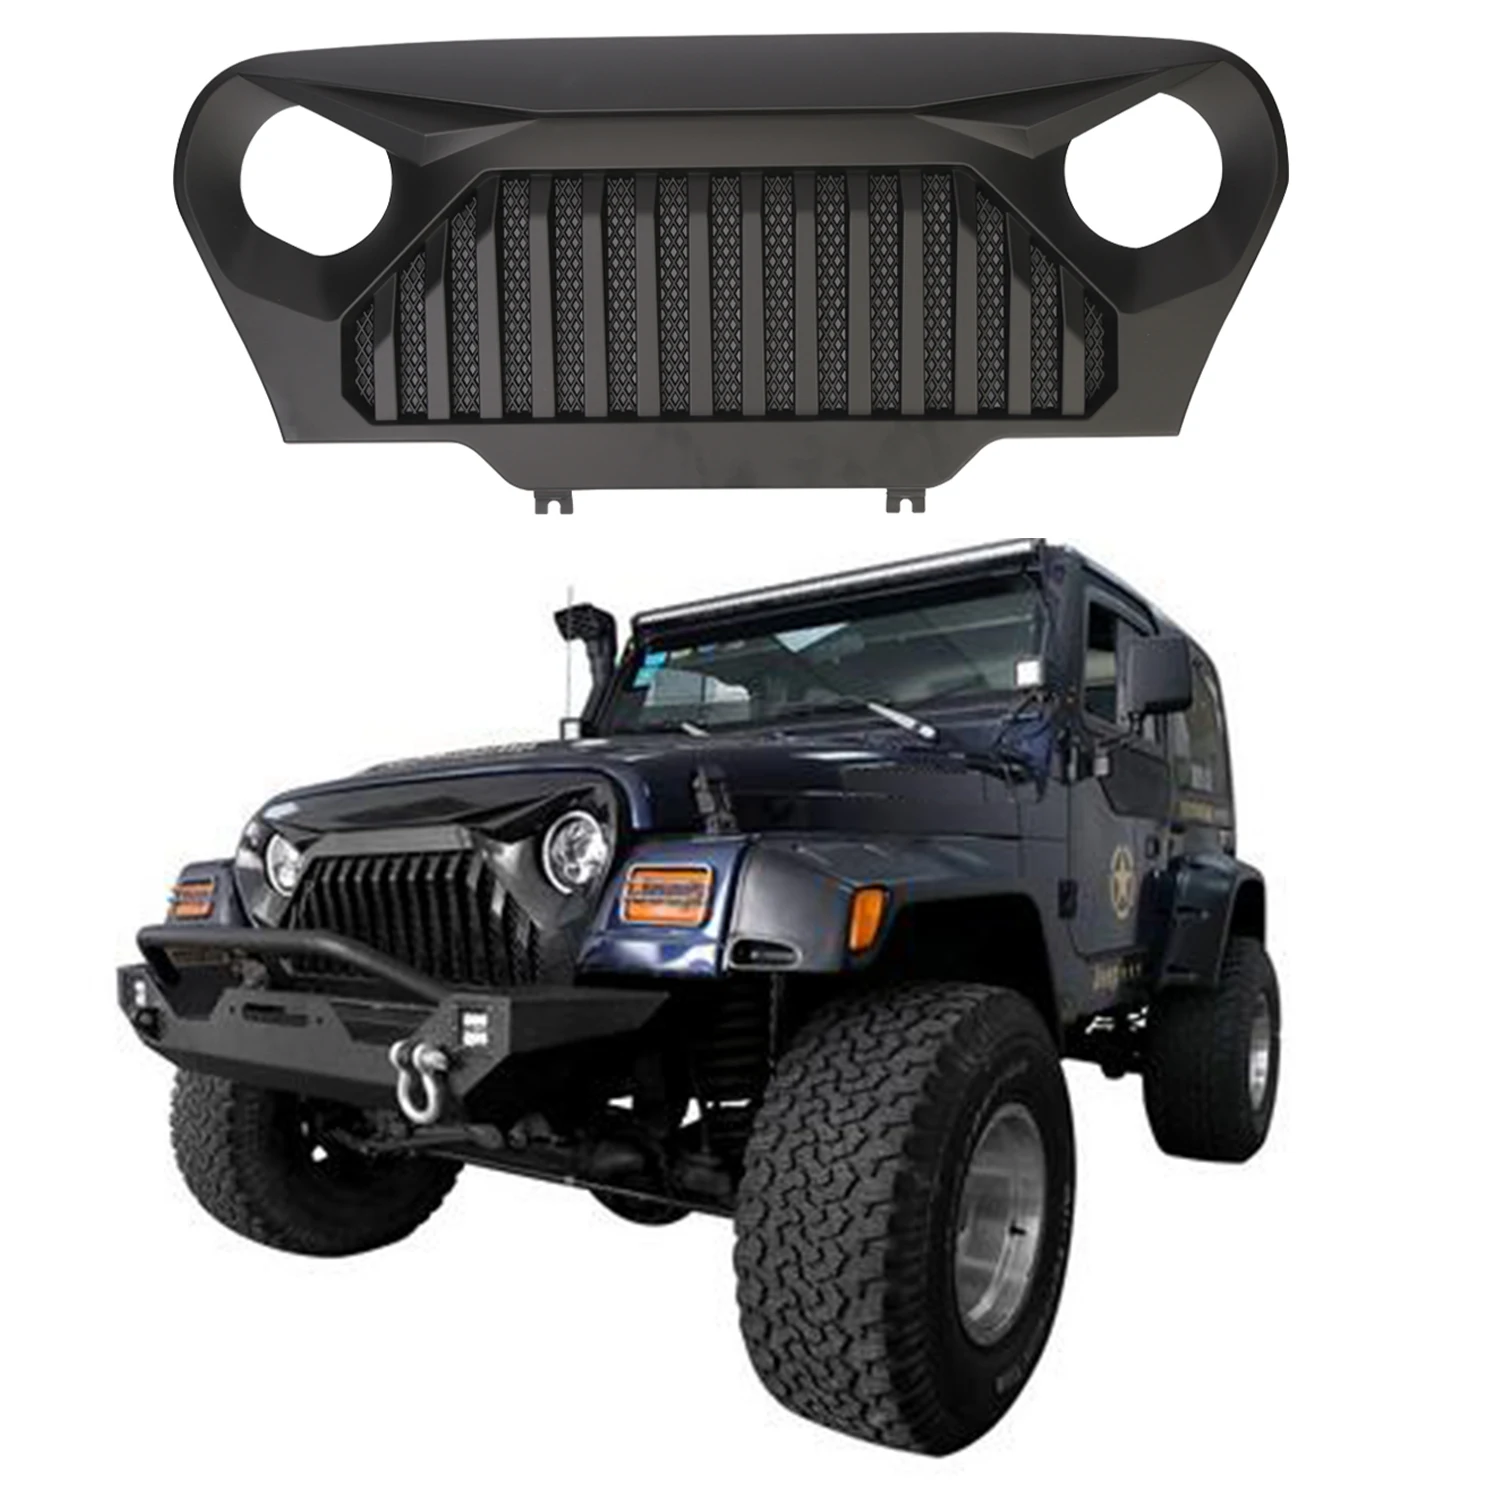 

SXMA JL282 ABS hot sale off-road auto car top fire second generation Front Grille for Jeep wrangler TJ 1997-2006